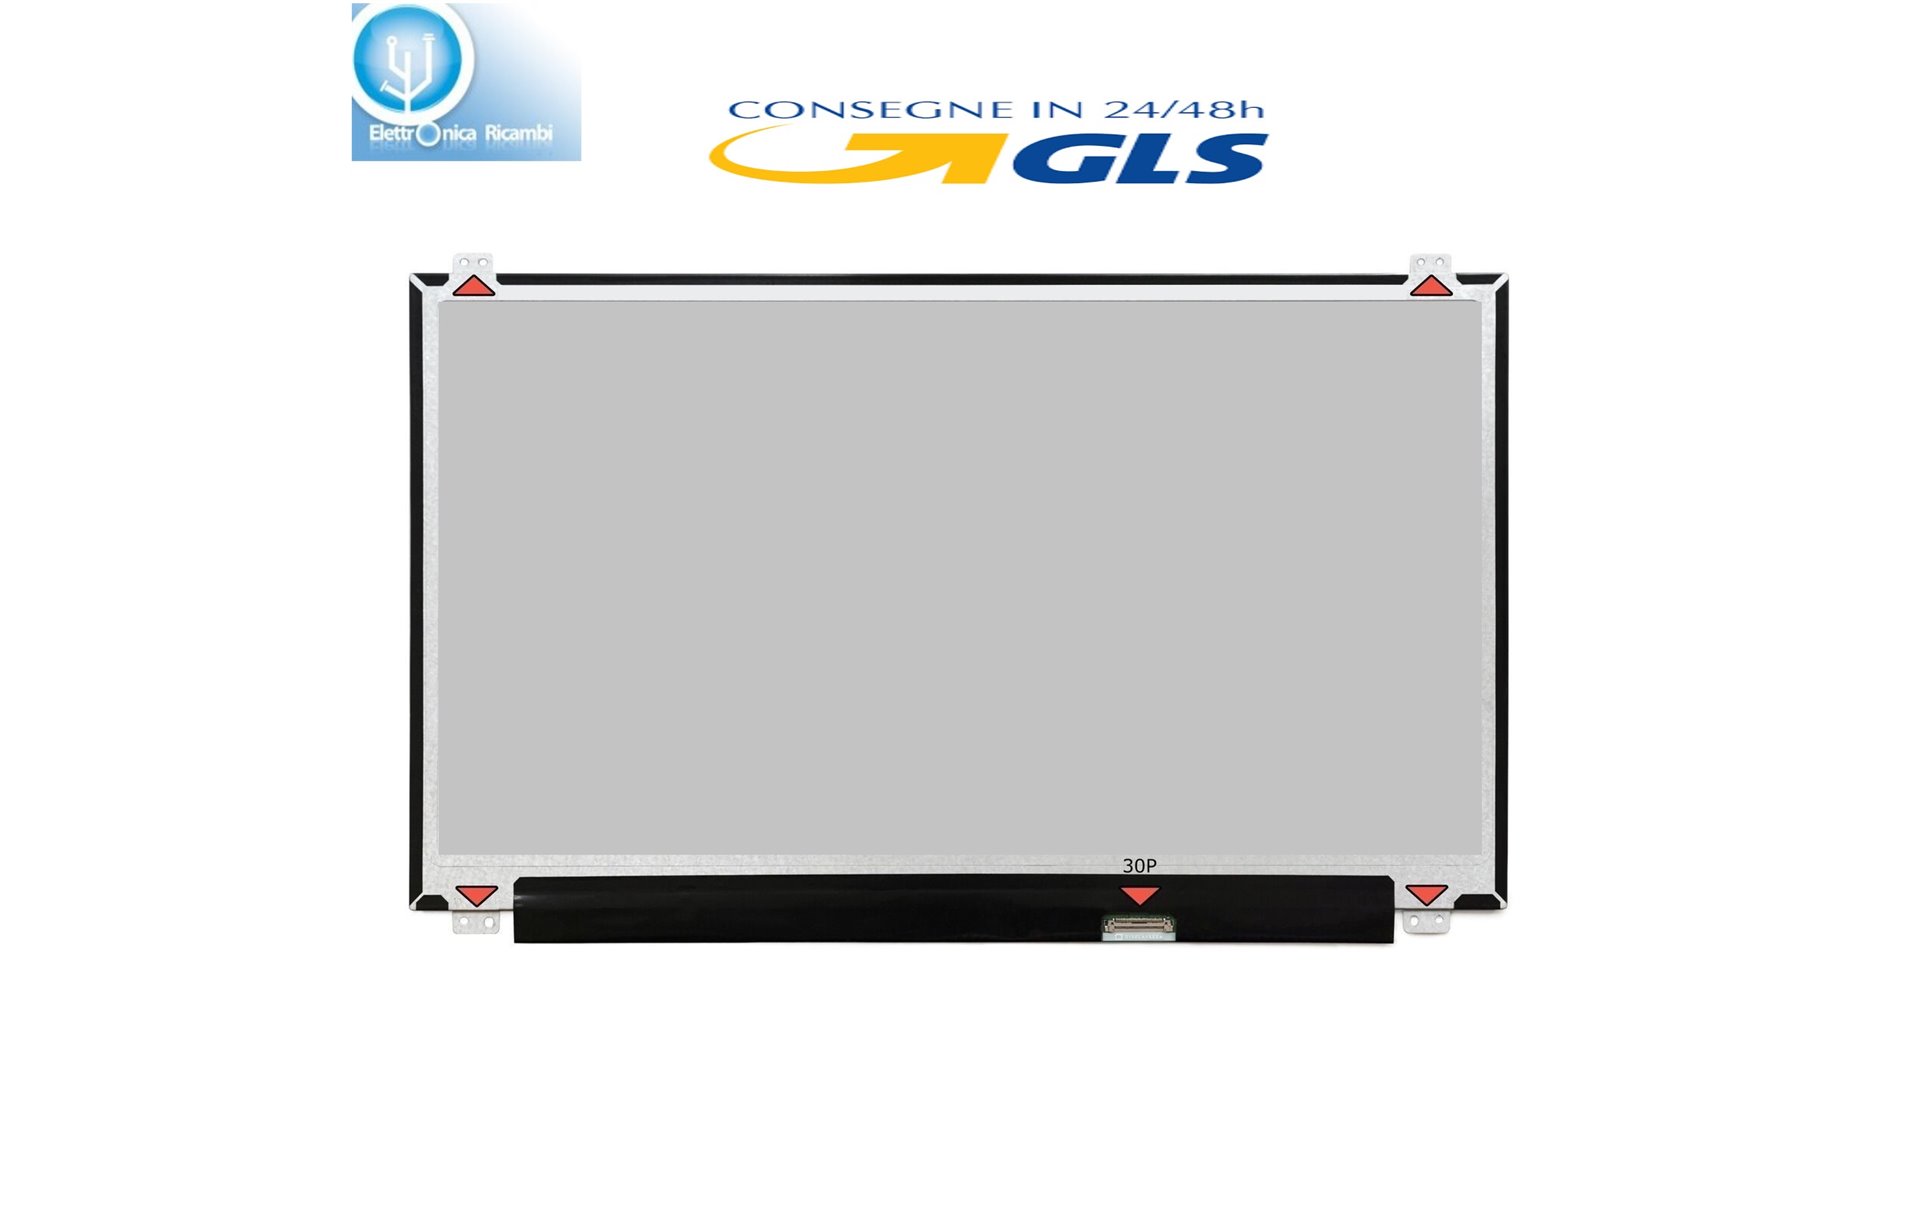 Display LCD Schermo 15,6 LED Acer Extensa 2508-C1Z1.